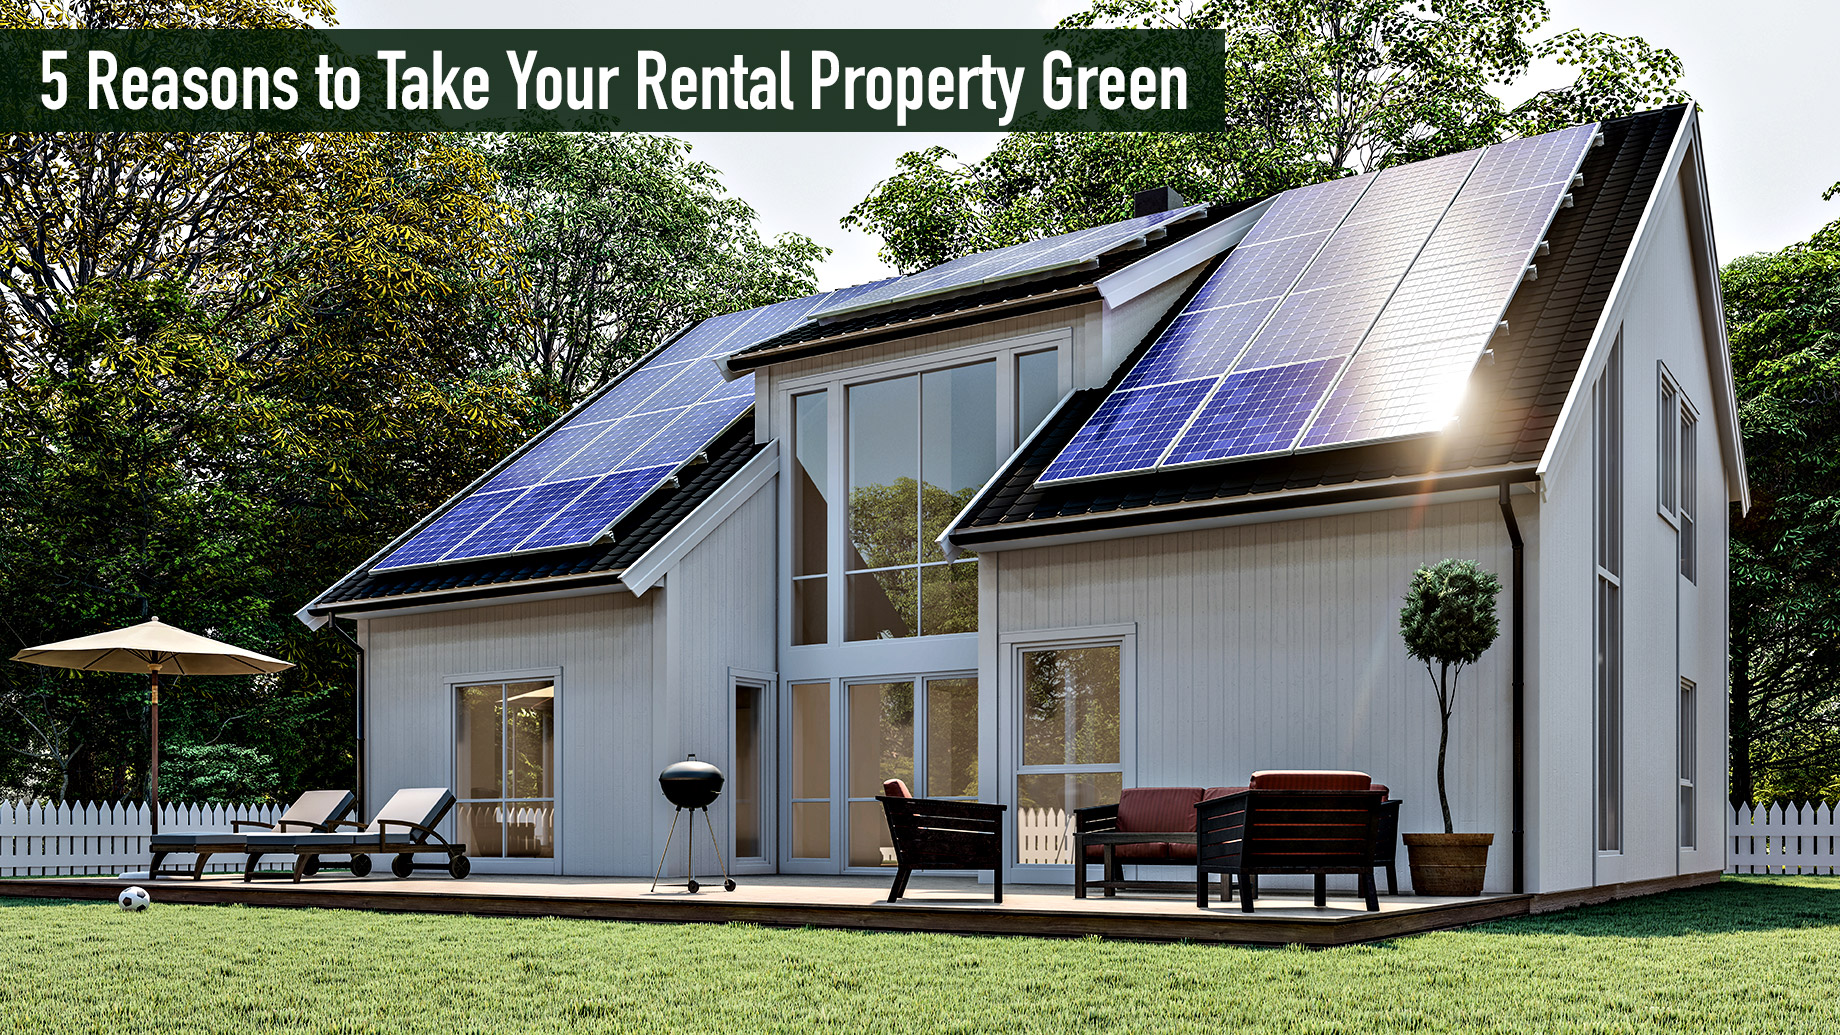 5 Reasons to Take Your Rental Property Green